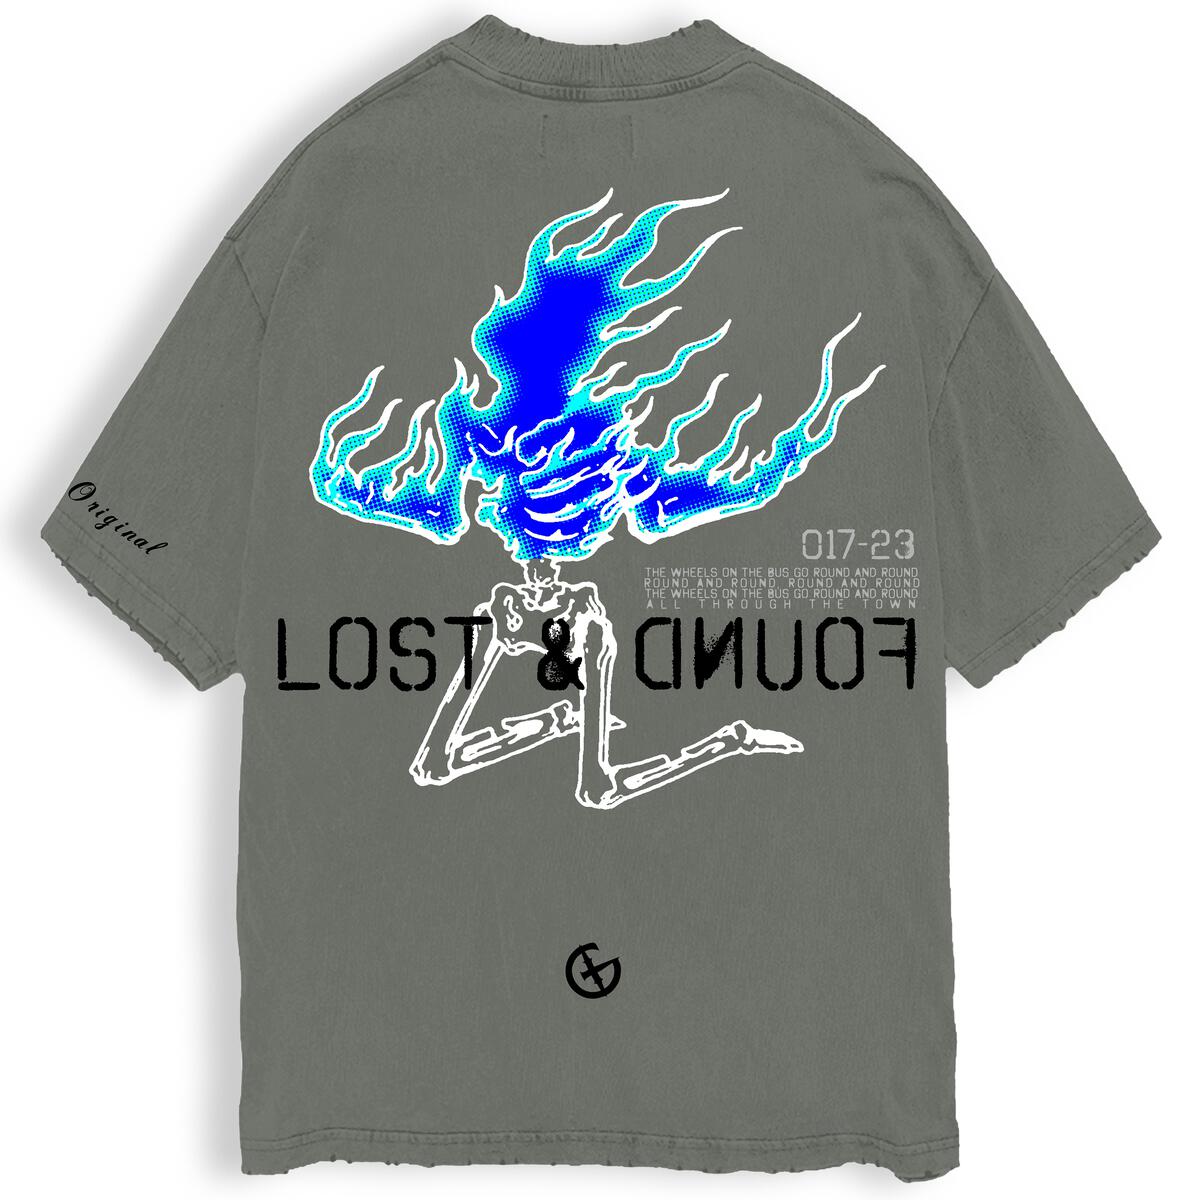 Gala Lost & Found Tees